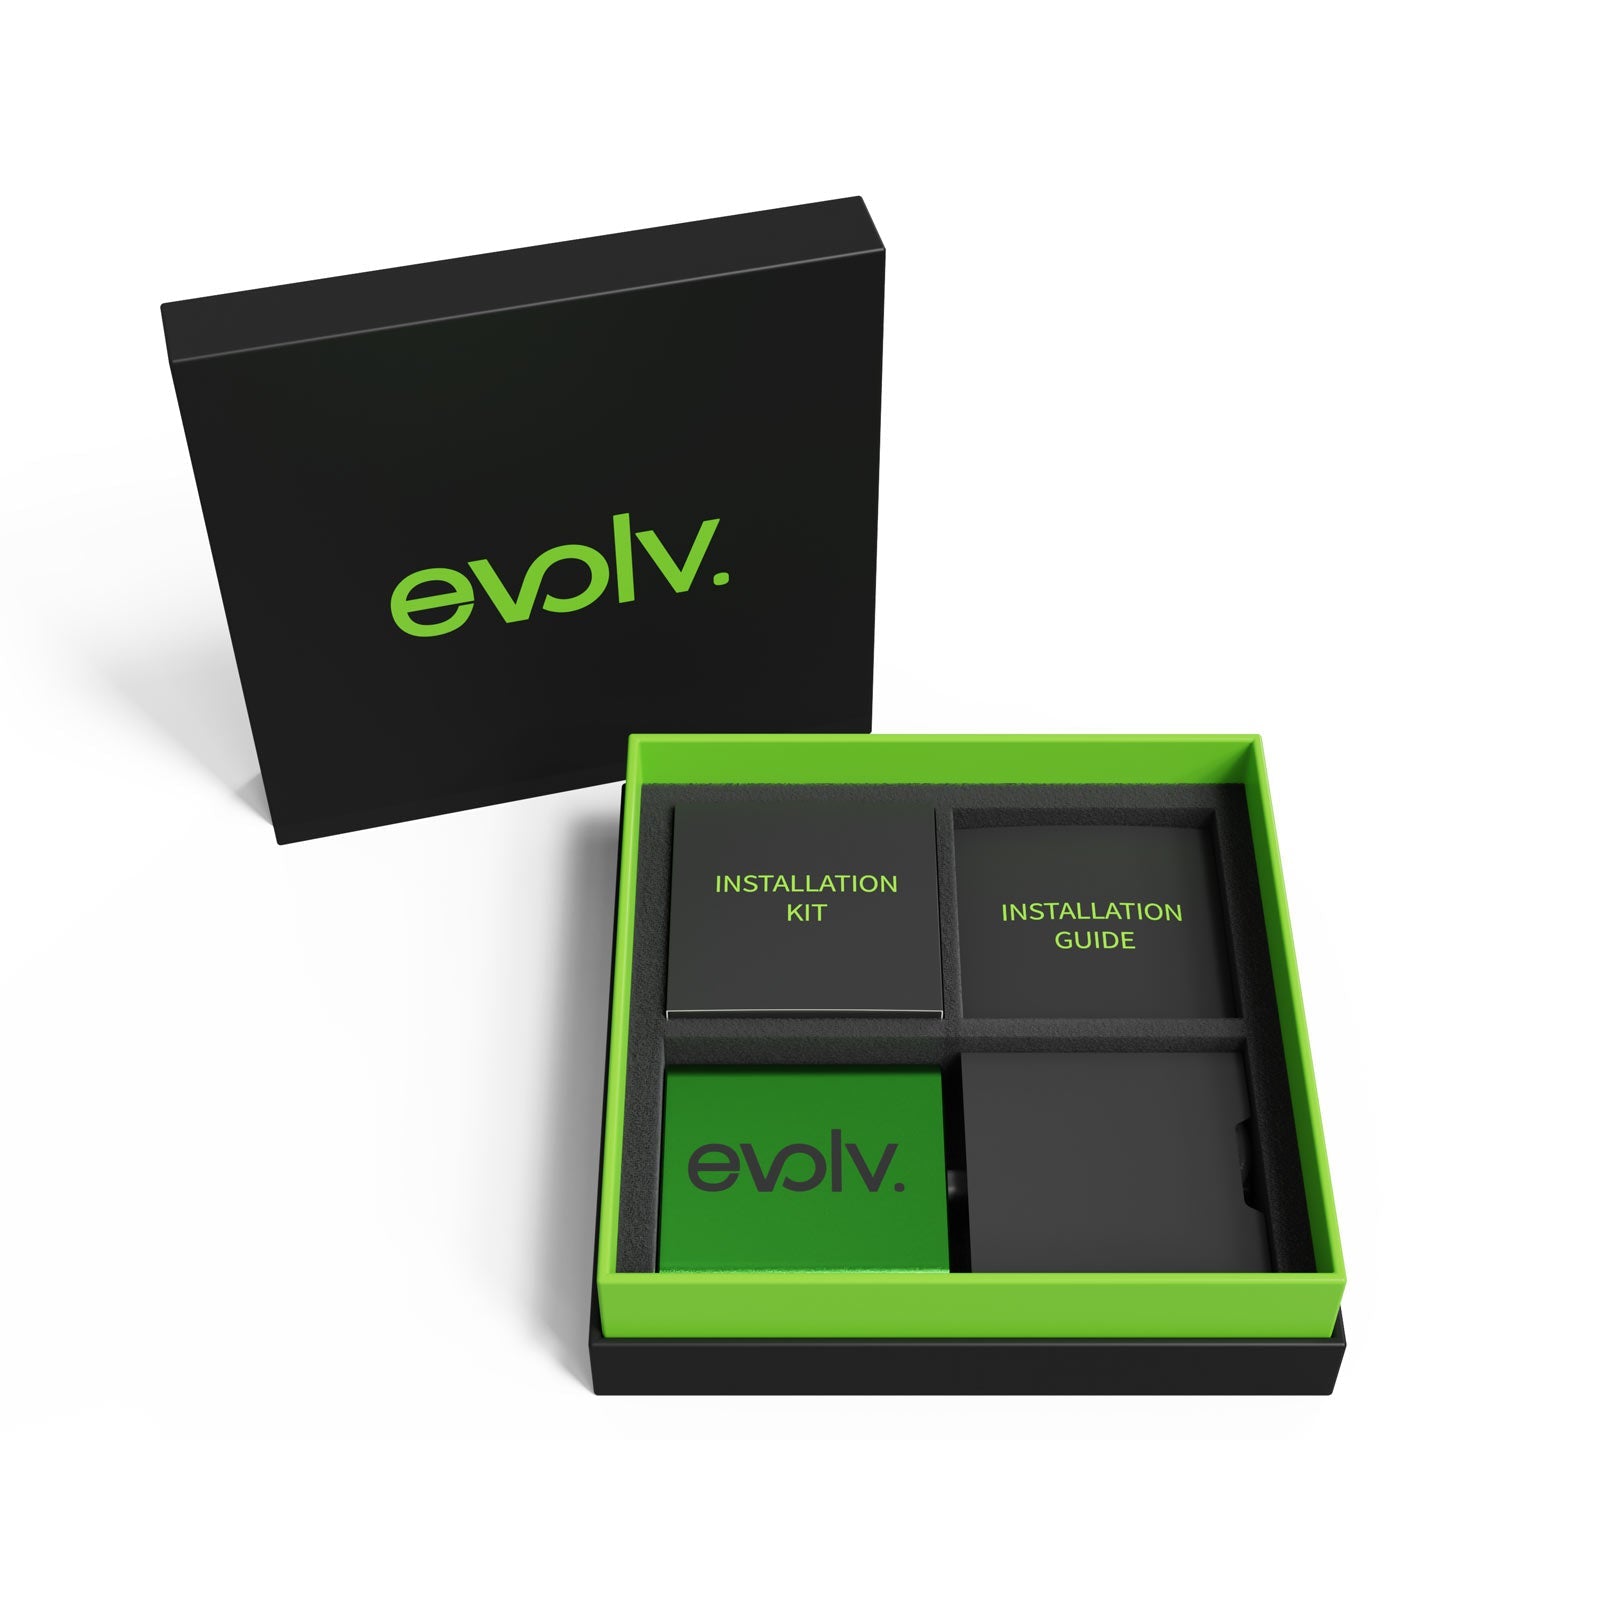 Increase your fuel mileage, performance and throttle response with an Evolv Ford E-250 Performance Chip!